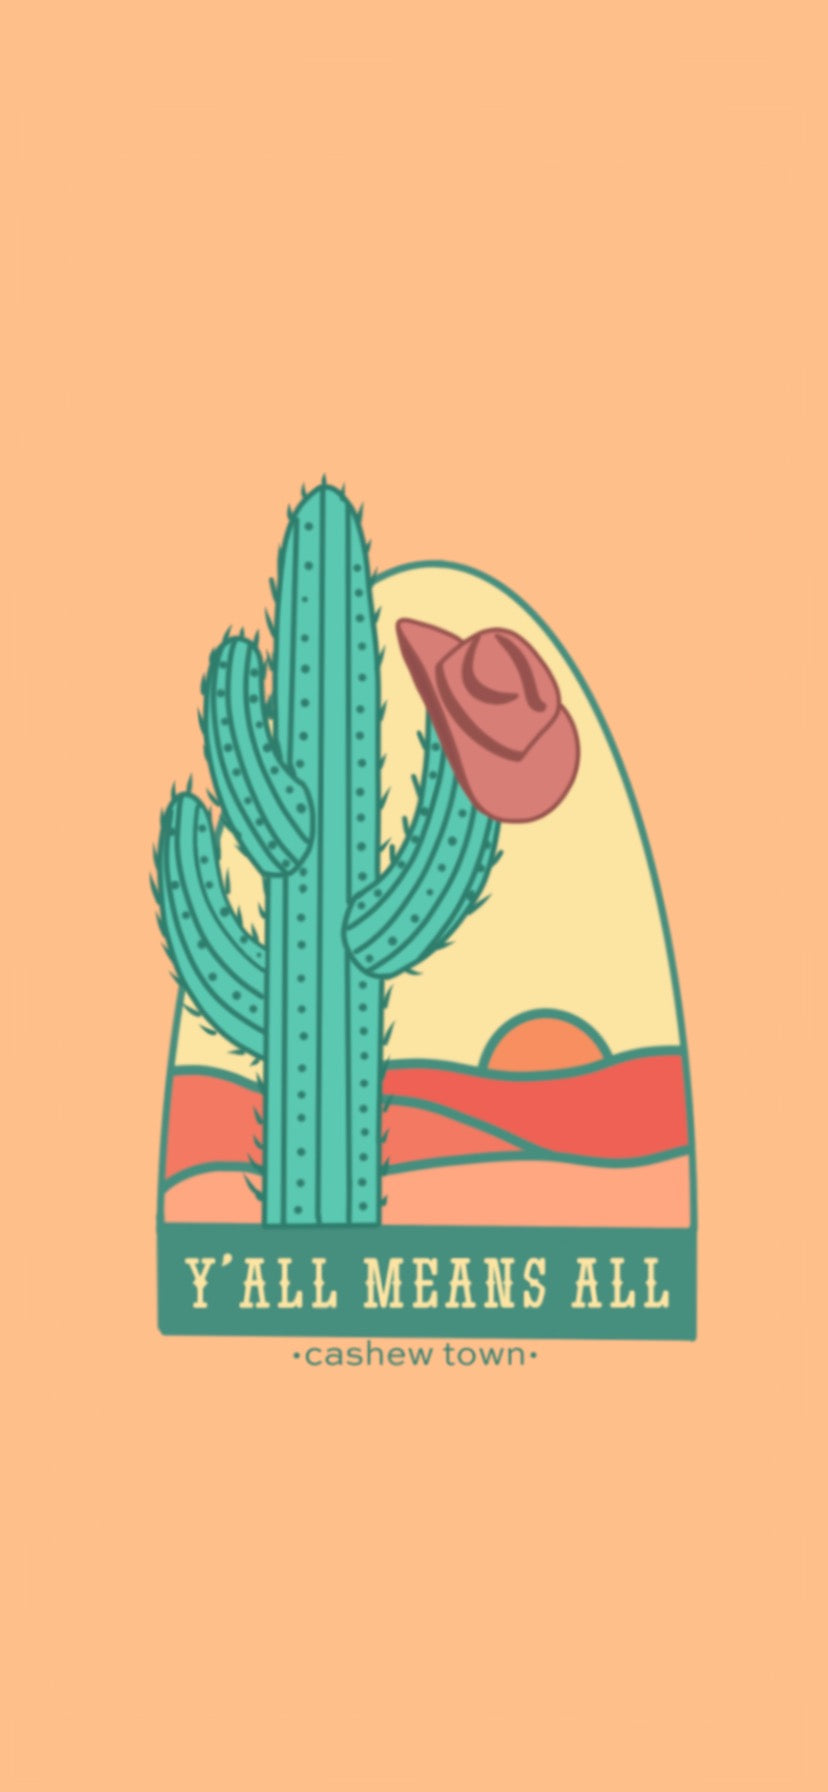 A phone wallpaper version of the Y'all Means All print. An upclose view of the "Y'all Means All" print. The Y'all Means All Design is logo on a muted pastel orange background. The logo is a drawn green cactus with a muted maroon cowboy hat hanging off the side, in front of a very simple line color fill of a landscape with "Y'ALL MEANS ALL" underneath & "cashew town" in small letters under the design.